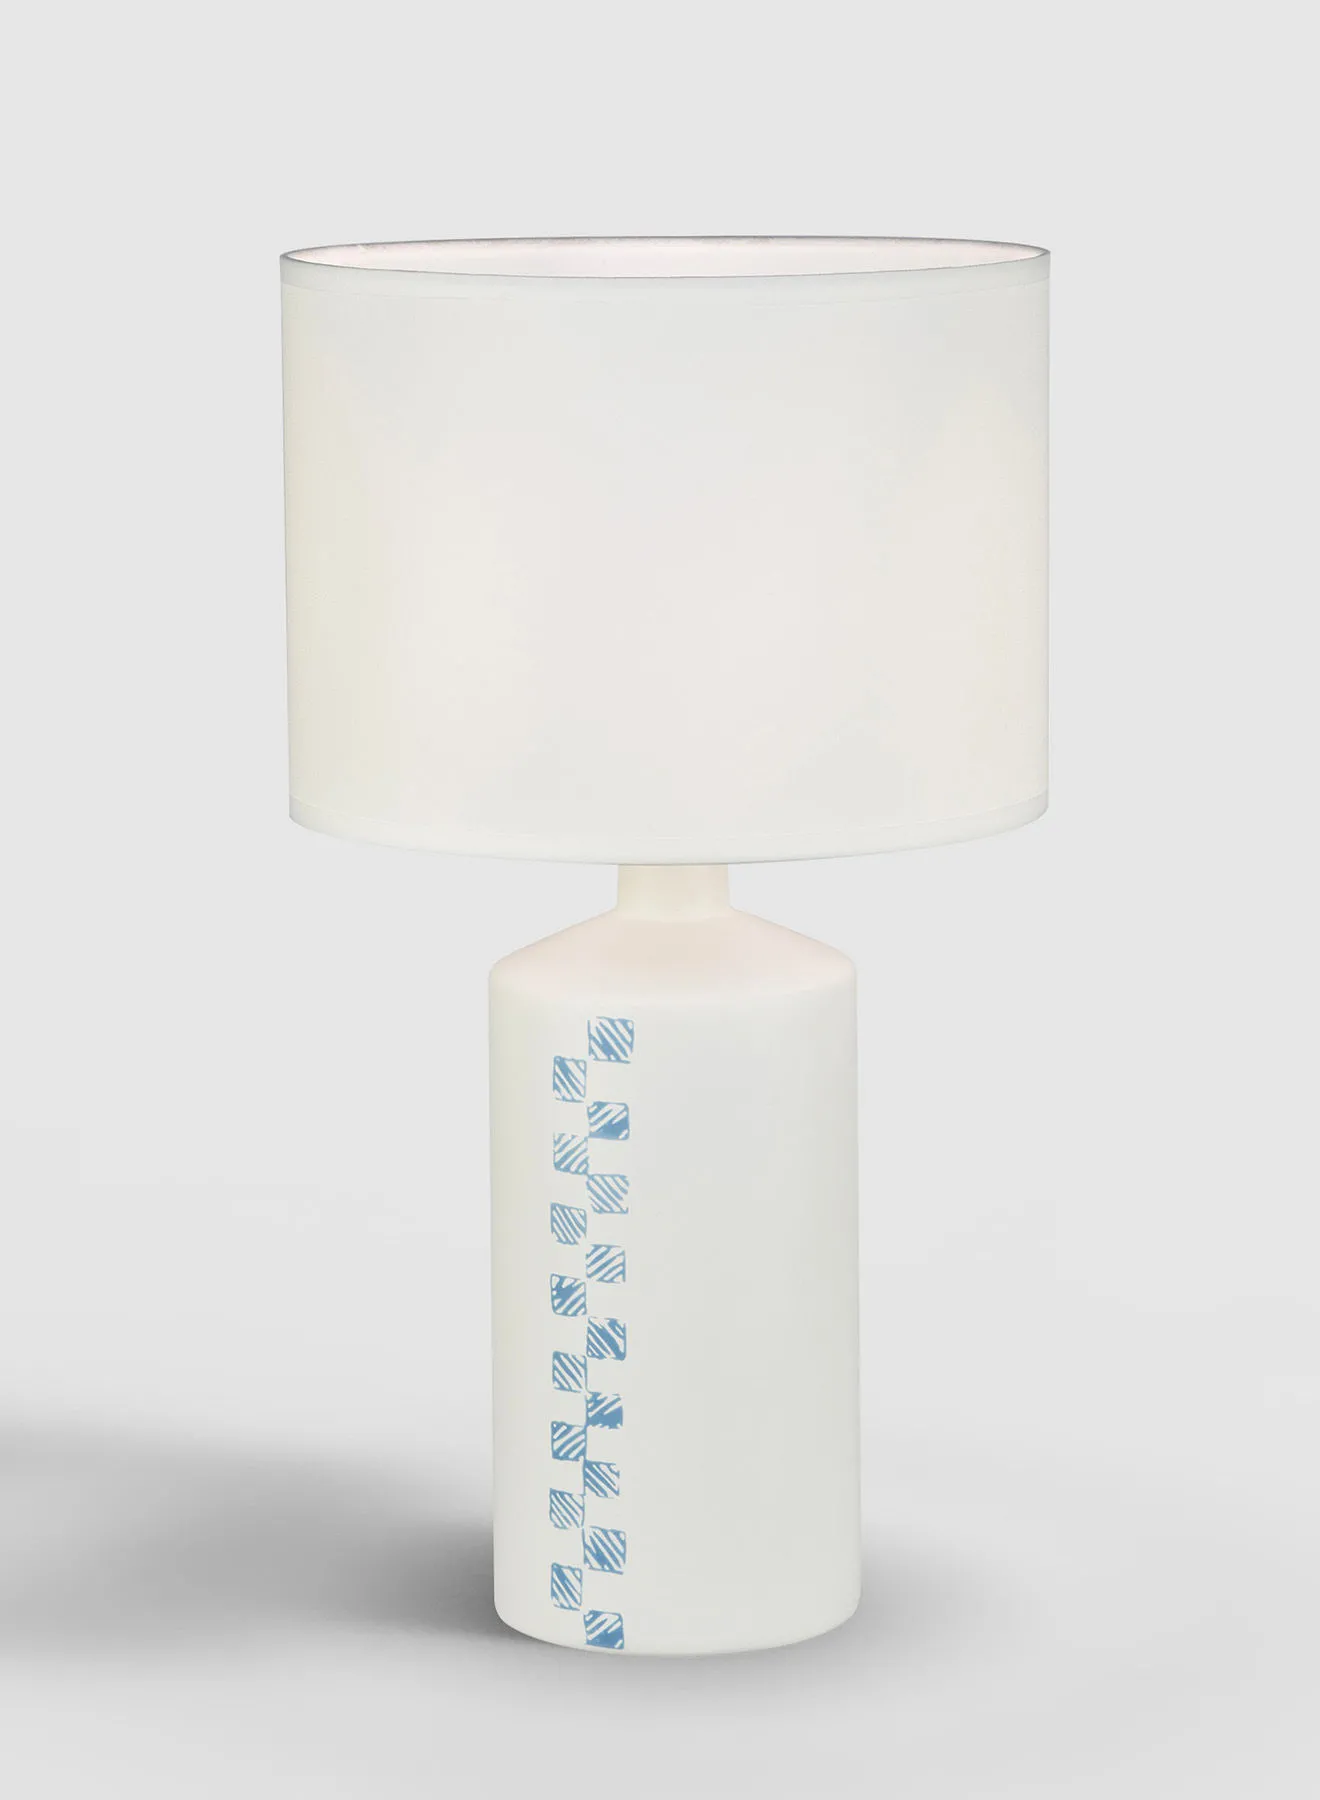 ebb & flow Tejado Ceramic Table Lamp Unique Luxury Quality Material for the Perfect Stylish Home AT16107 Blue/Off White 25.5 x 46.5